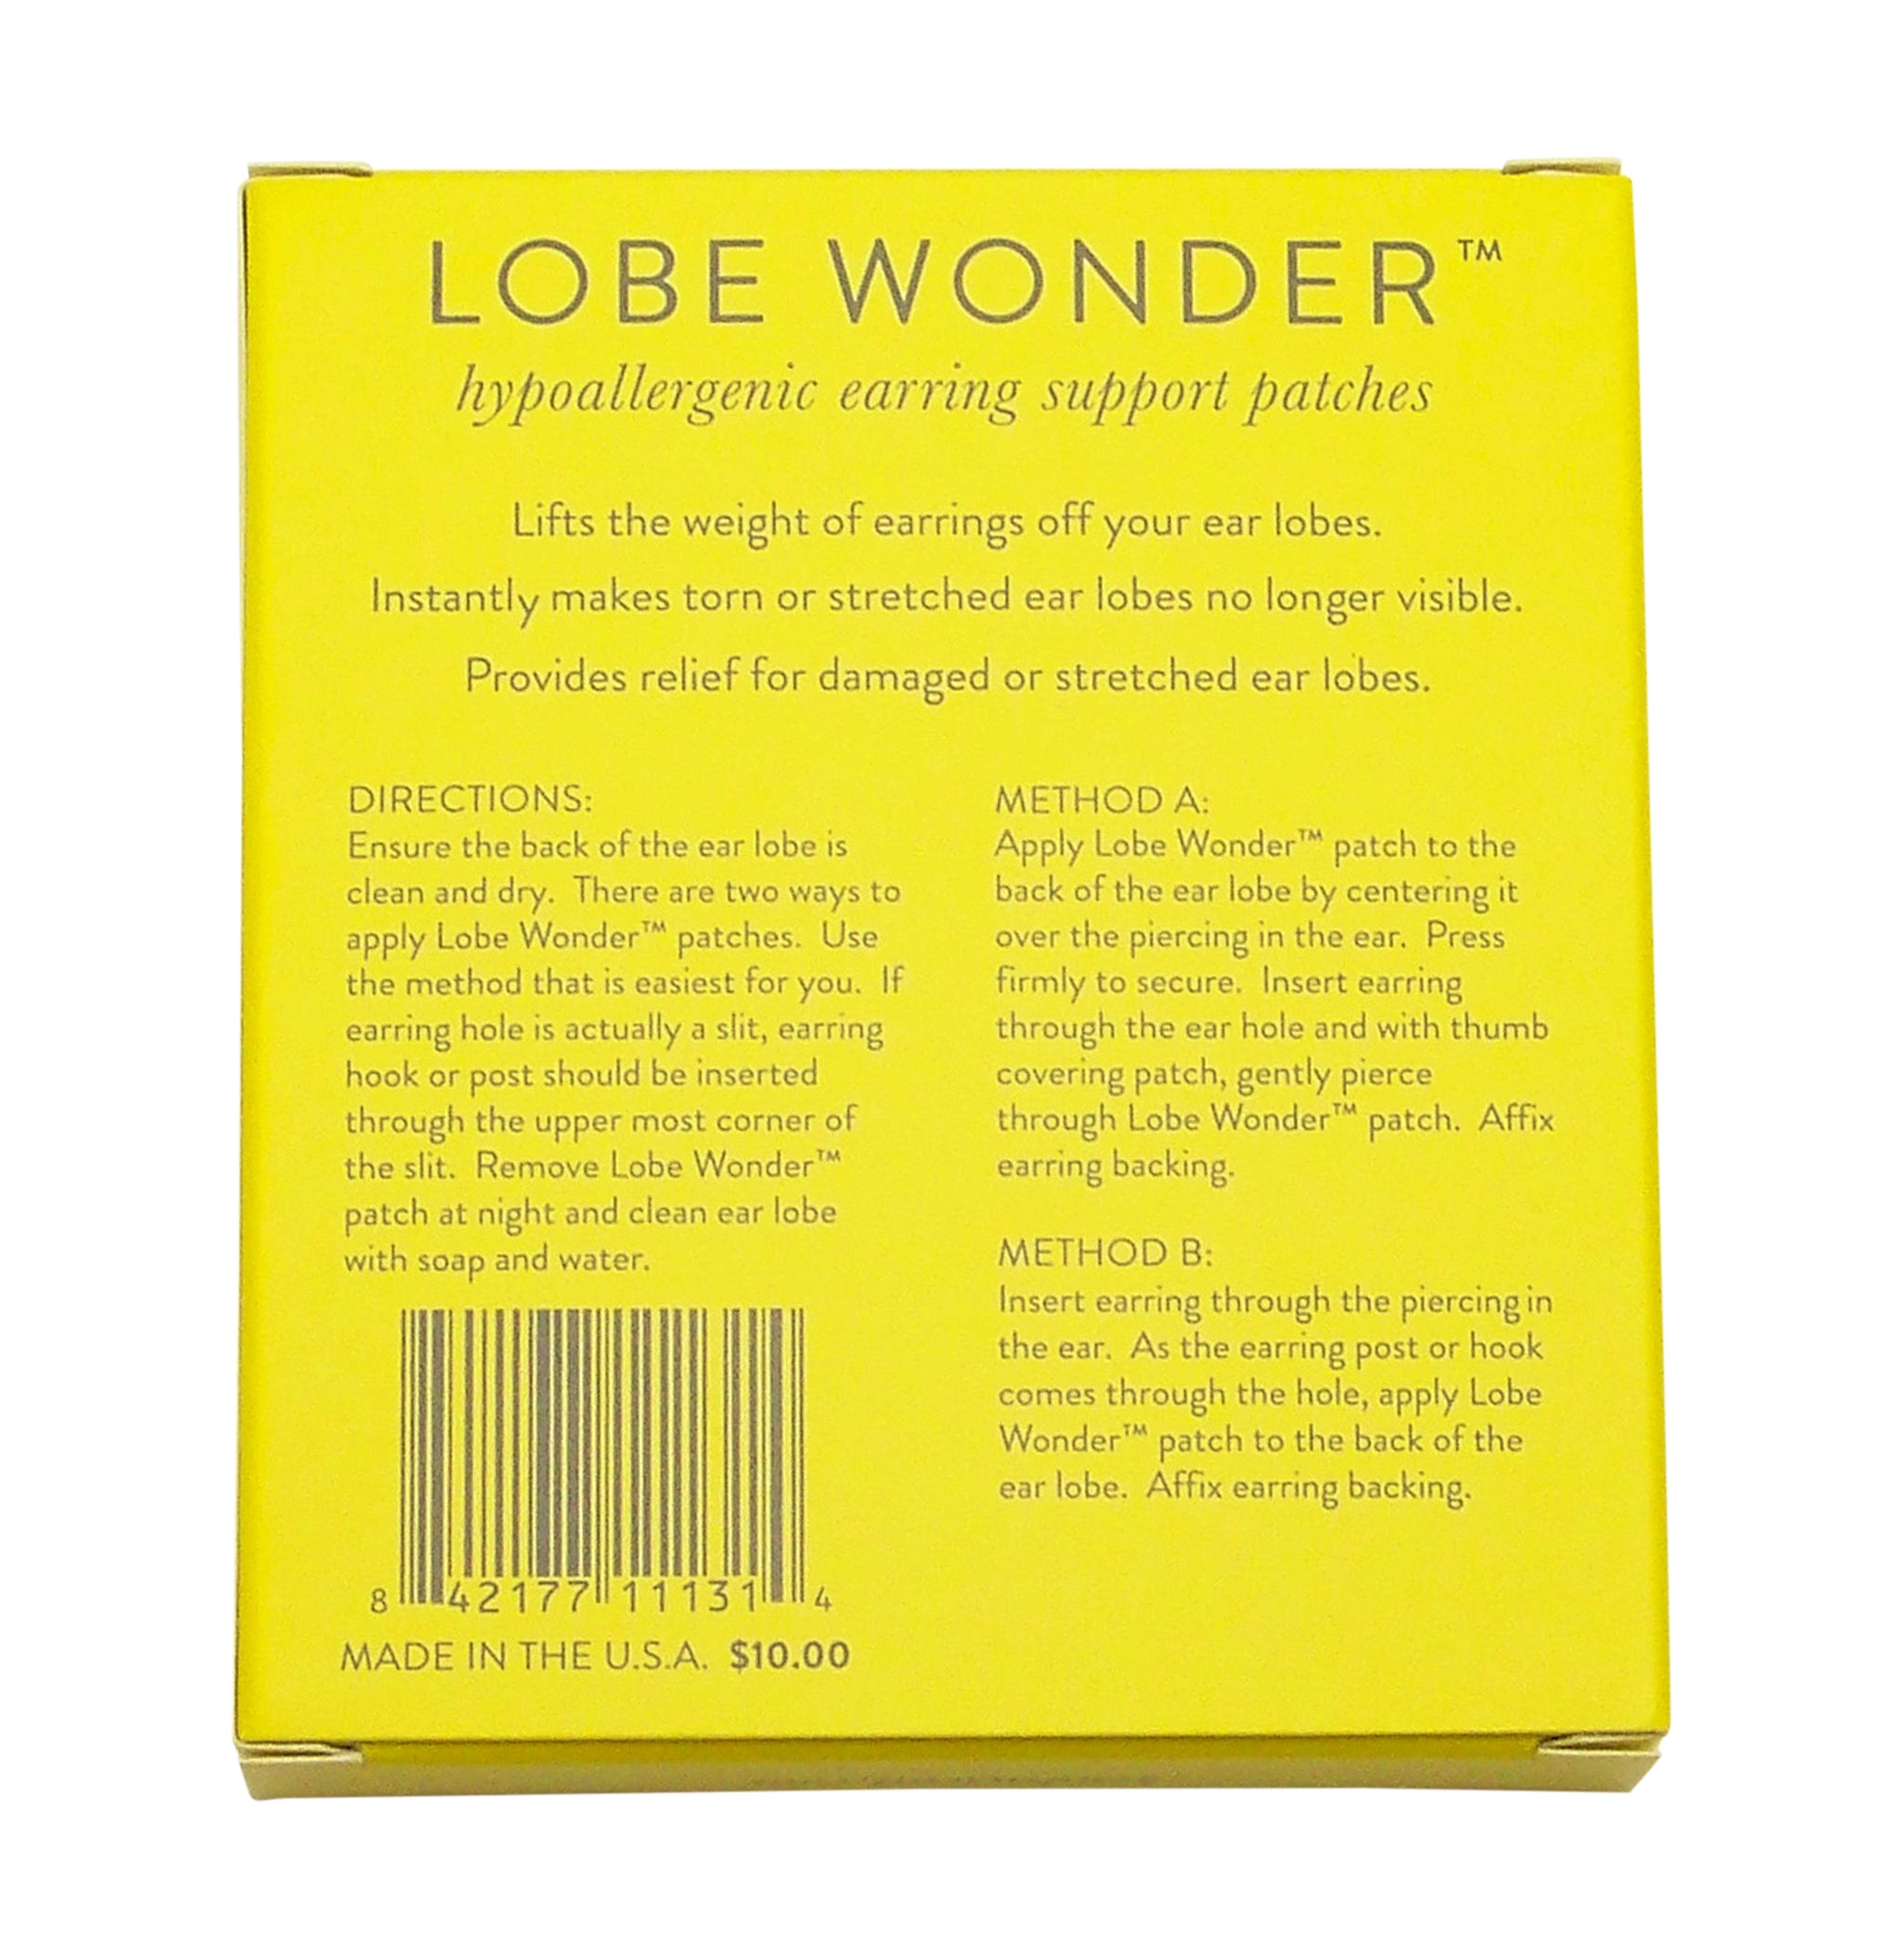 LOBE WONDER (Earring Support Patches for Damaged; Stretched; and